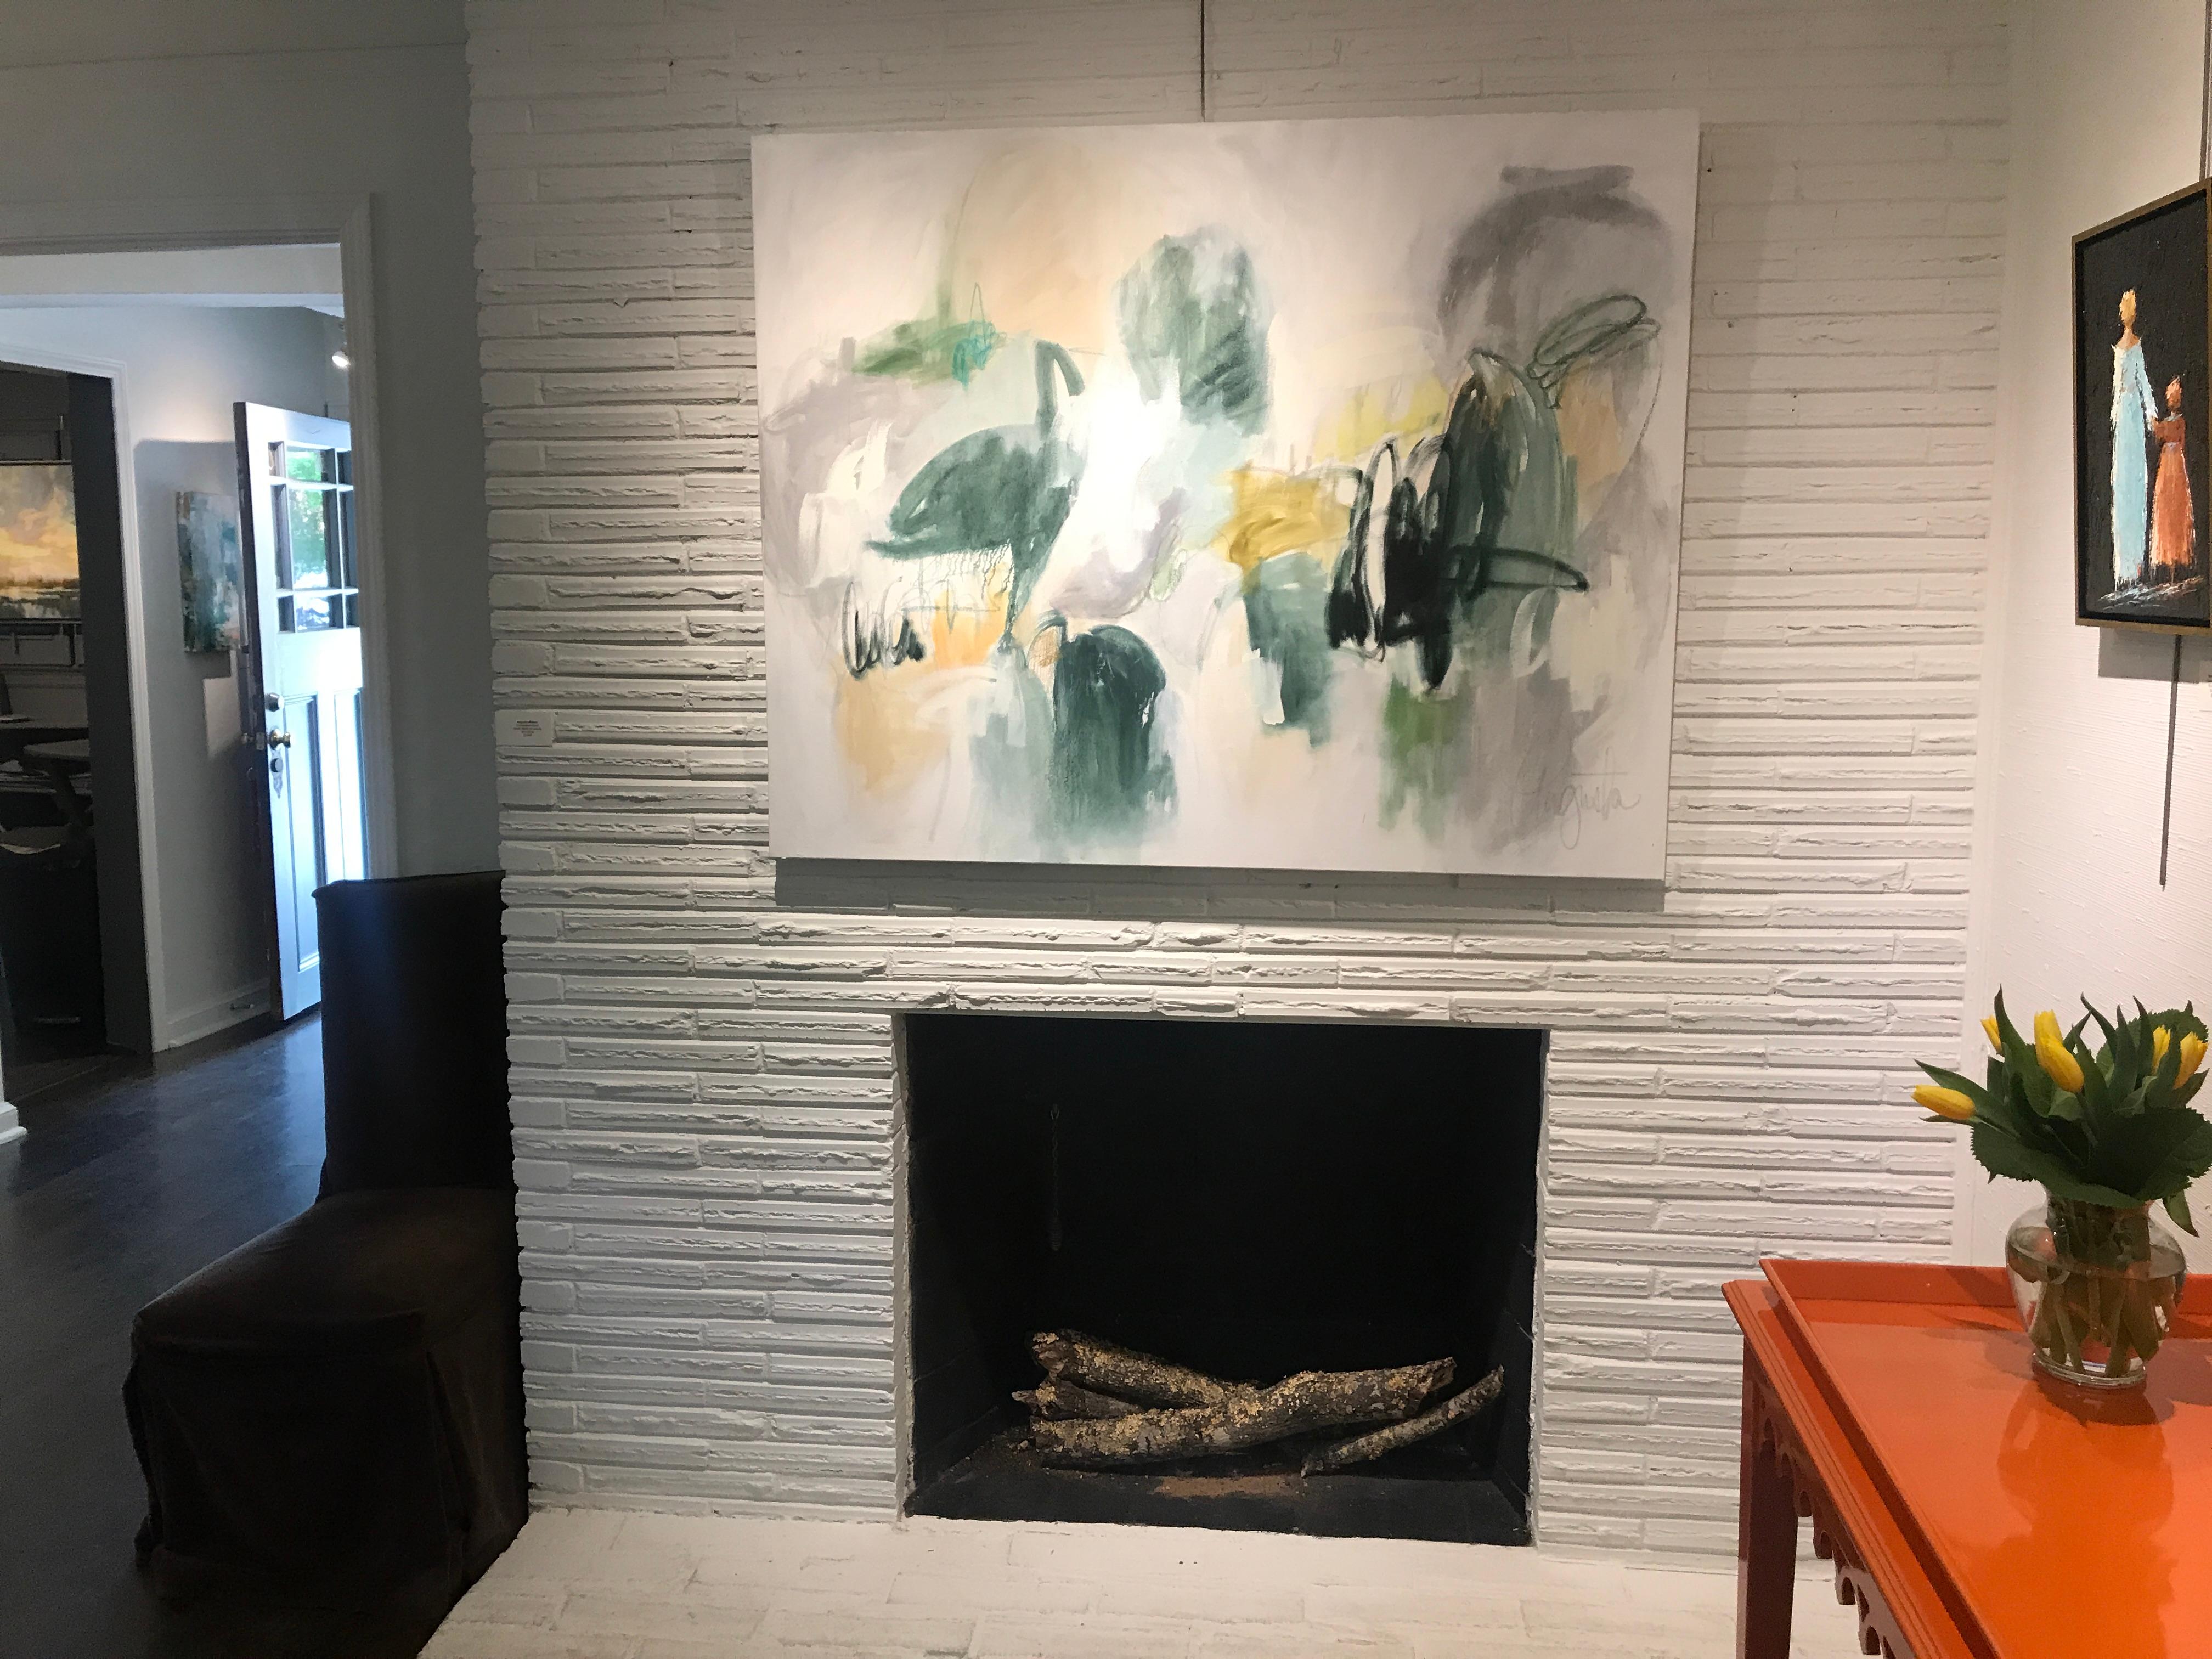 'Cumberland Island' is a large abstract mixed media on canvas painting of horizontal format, created by American artist Augusta Wilson in 2019. Featuring a palette made of green, white, black, grey and yellow tones, the painting attracts our